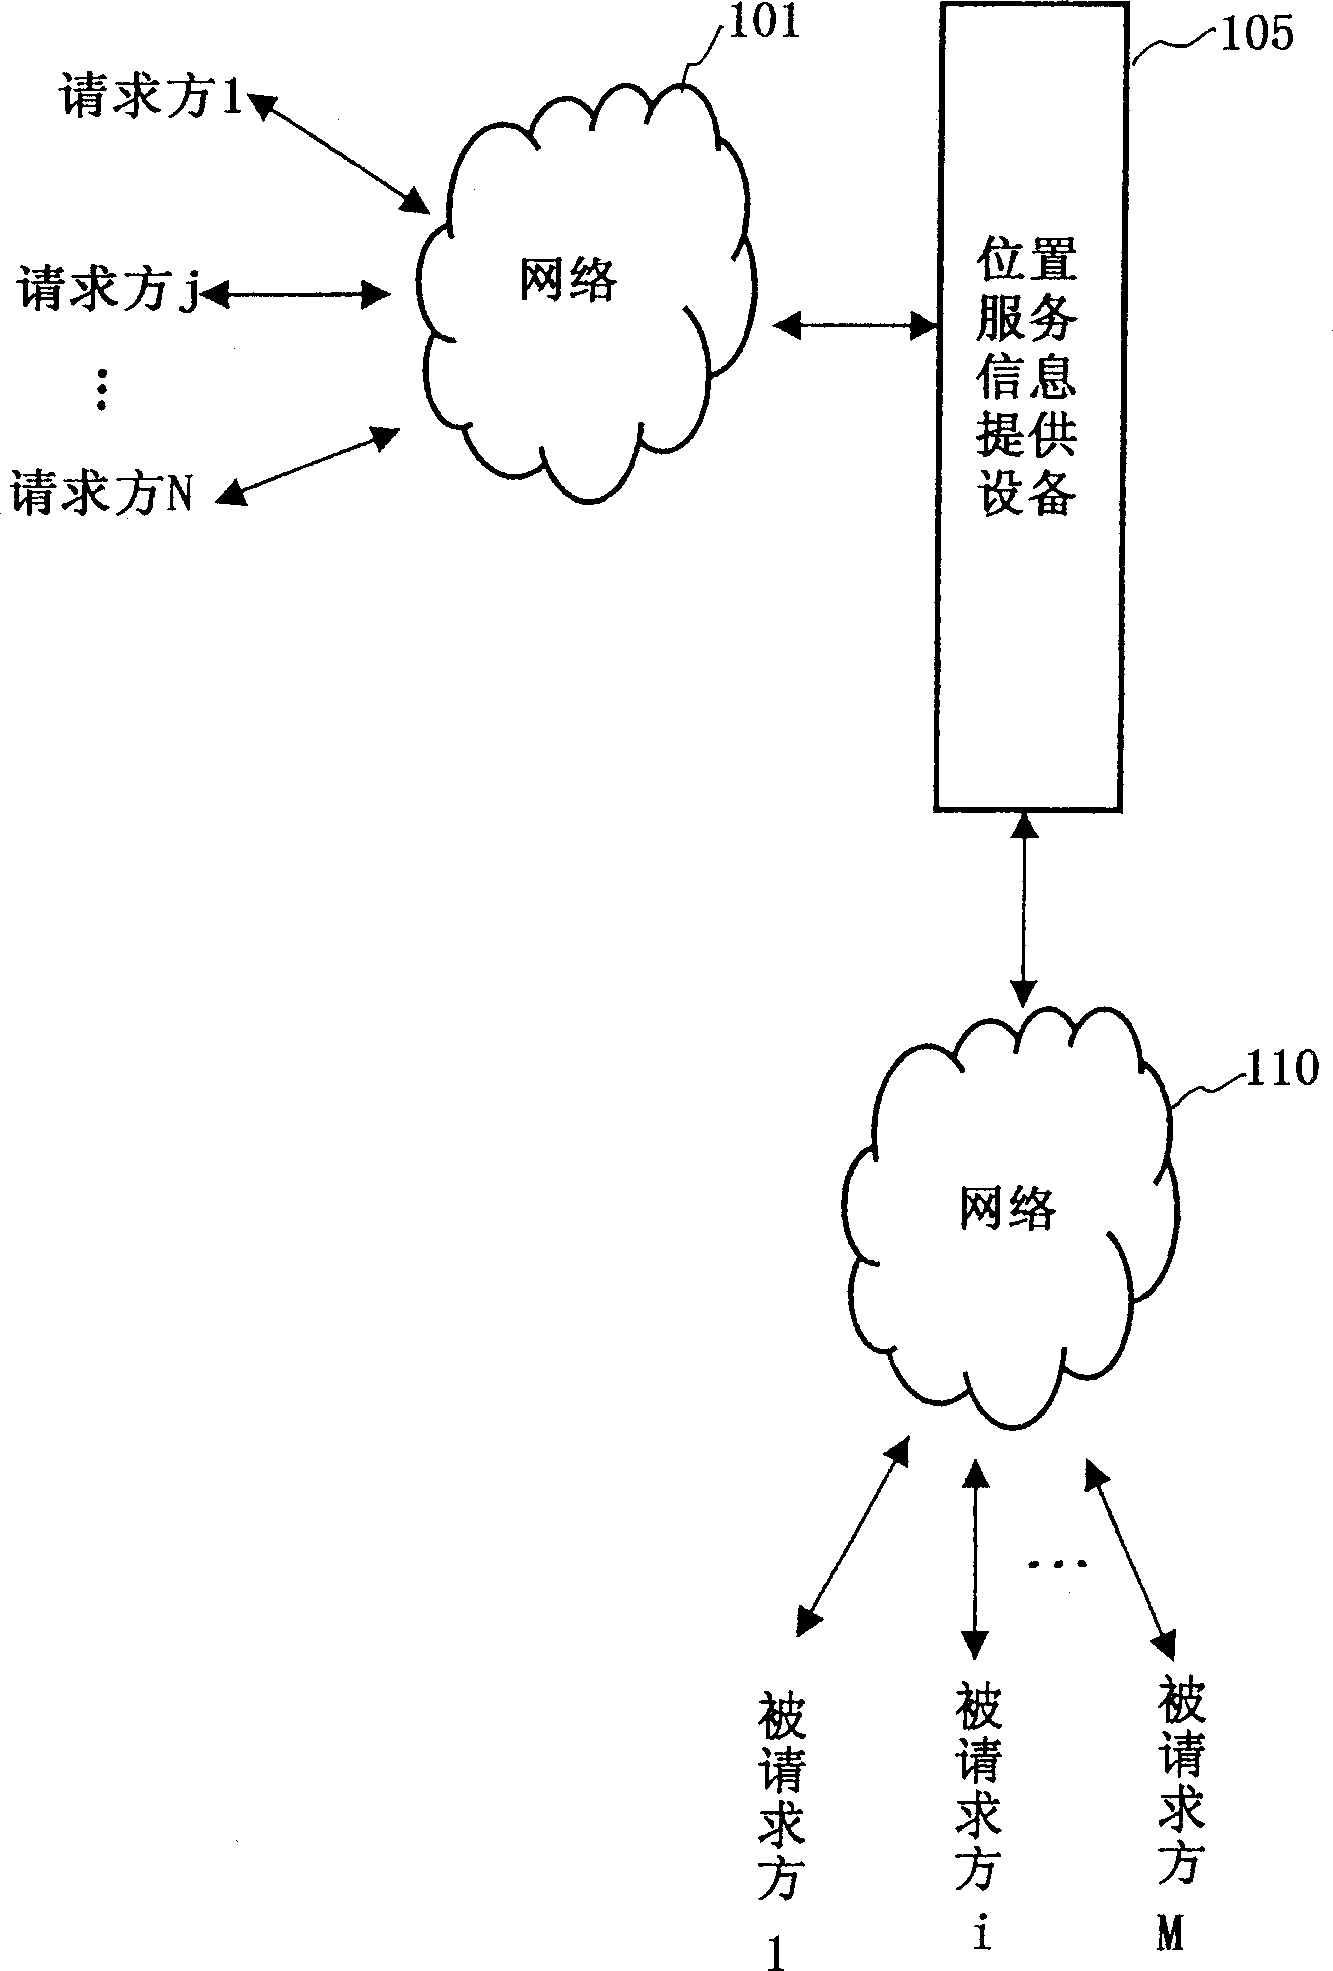 Information providing system, device, method and popular operation device based on geological location